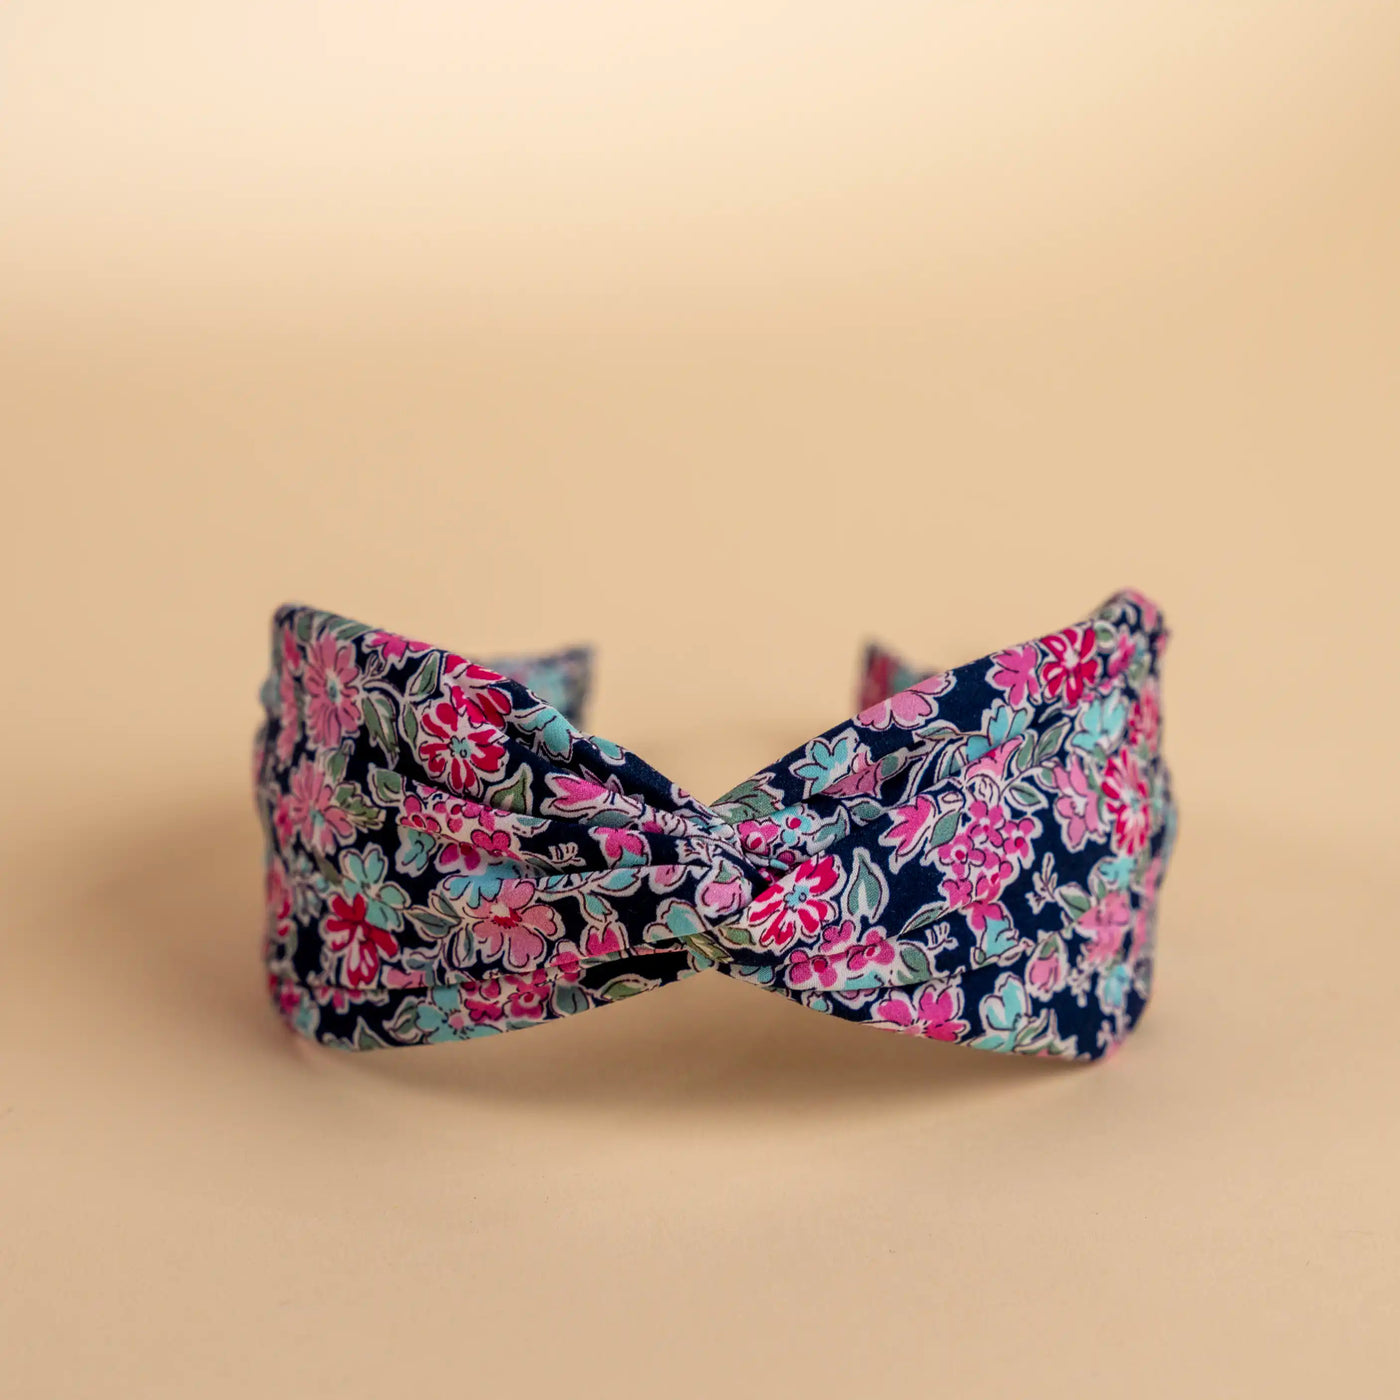 Lucys Navy Poppy Floral Headband. Dark navy background with pink and blue flowers. Front view. 